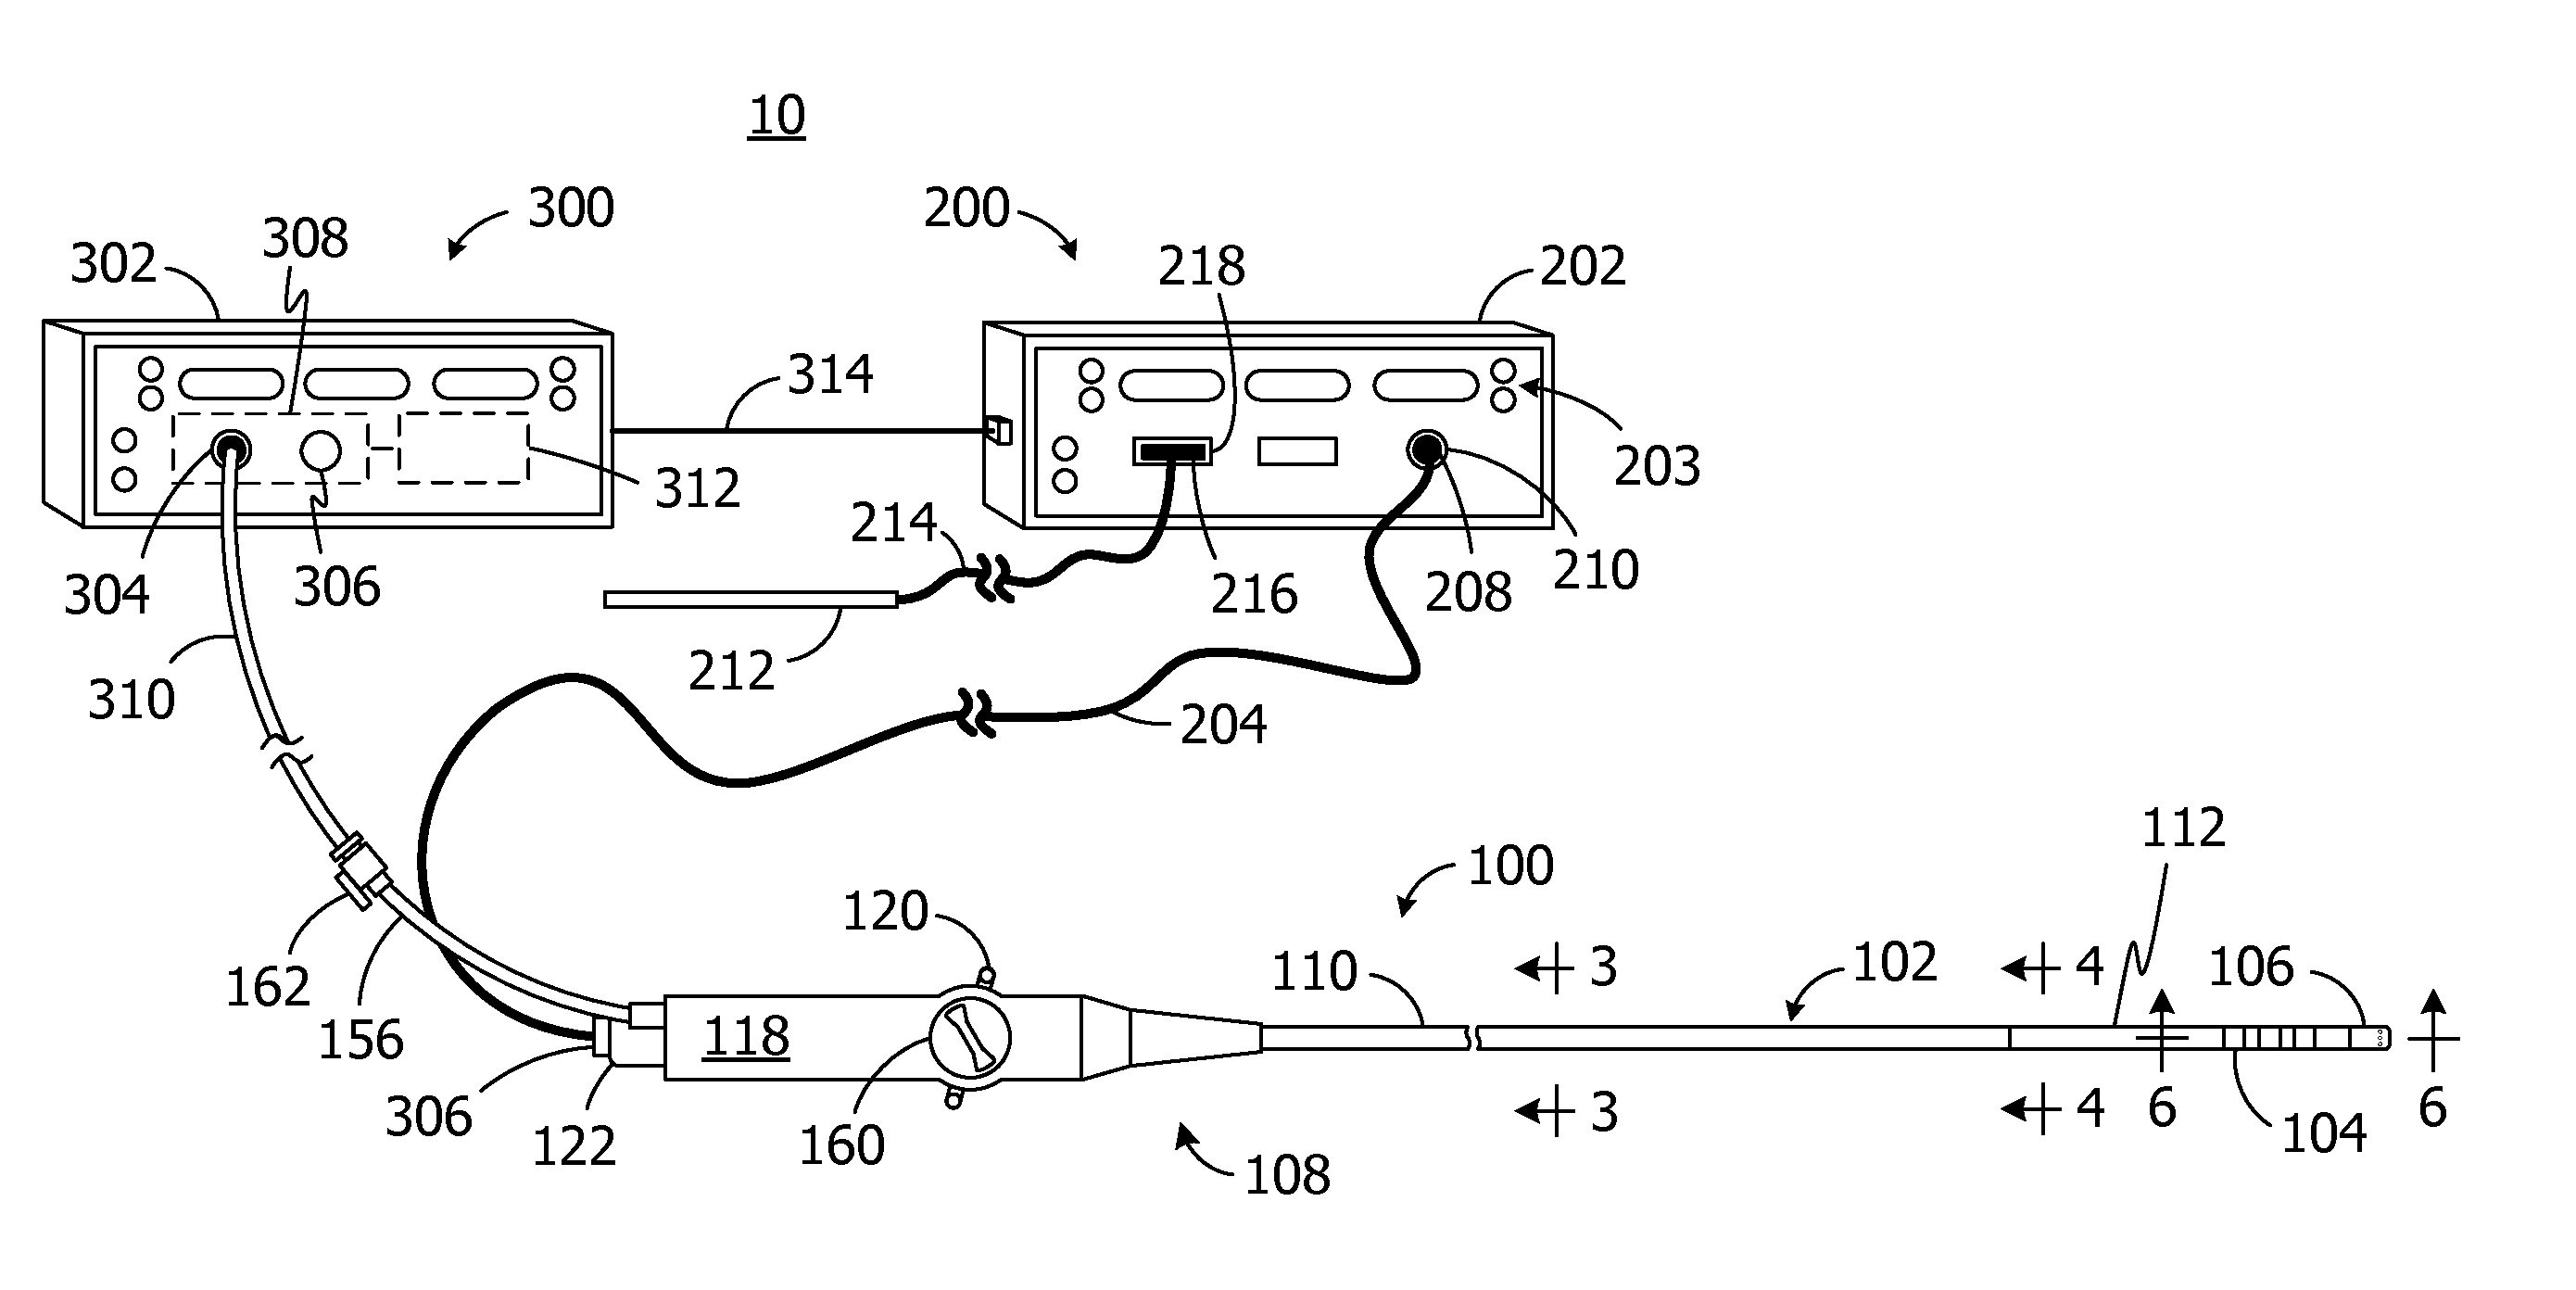 Apparatus and methods for supplying fluid to an electrophysiology apparatus